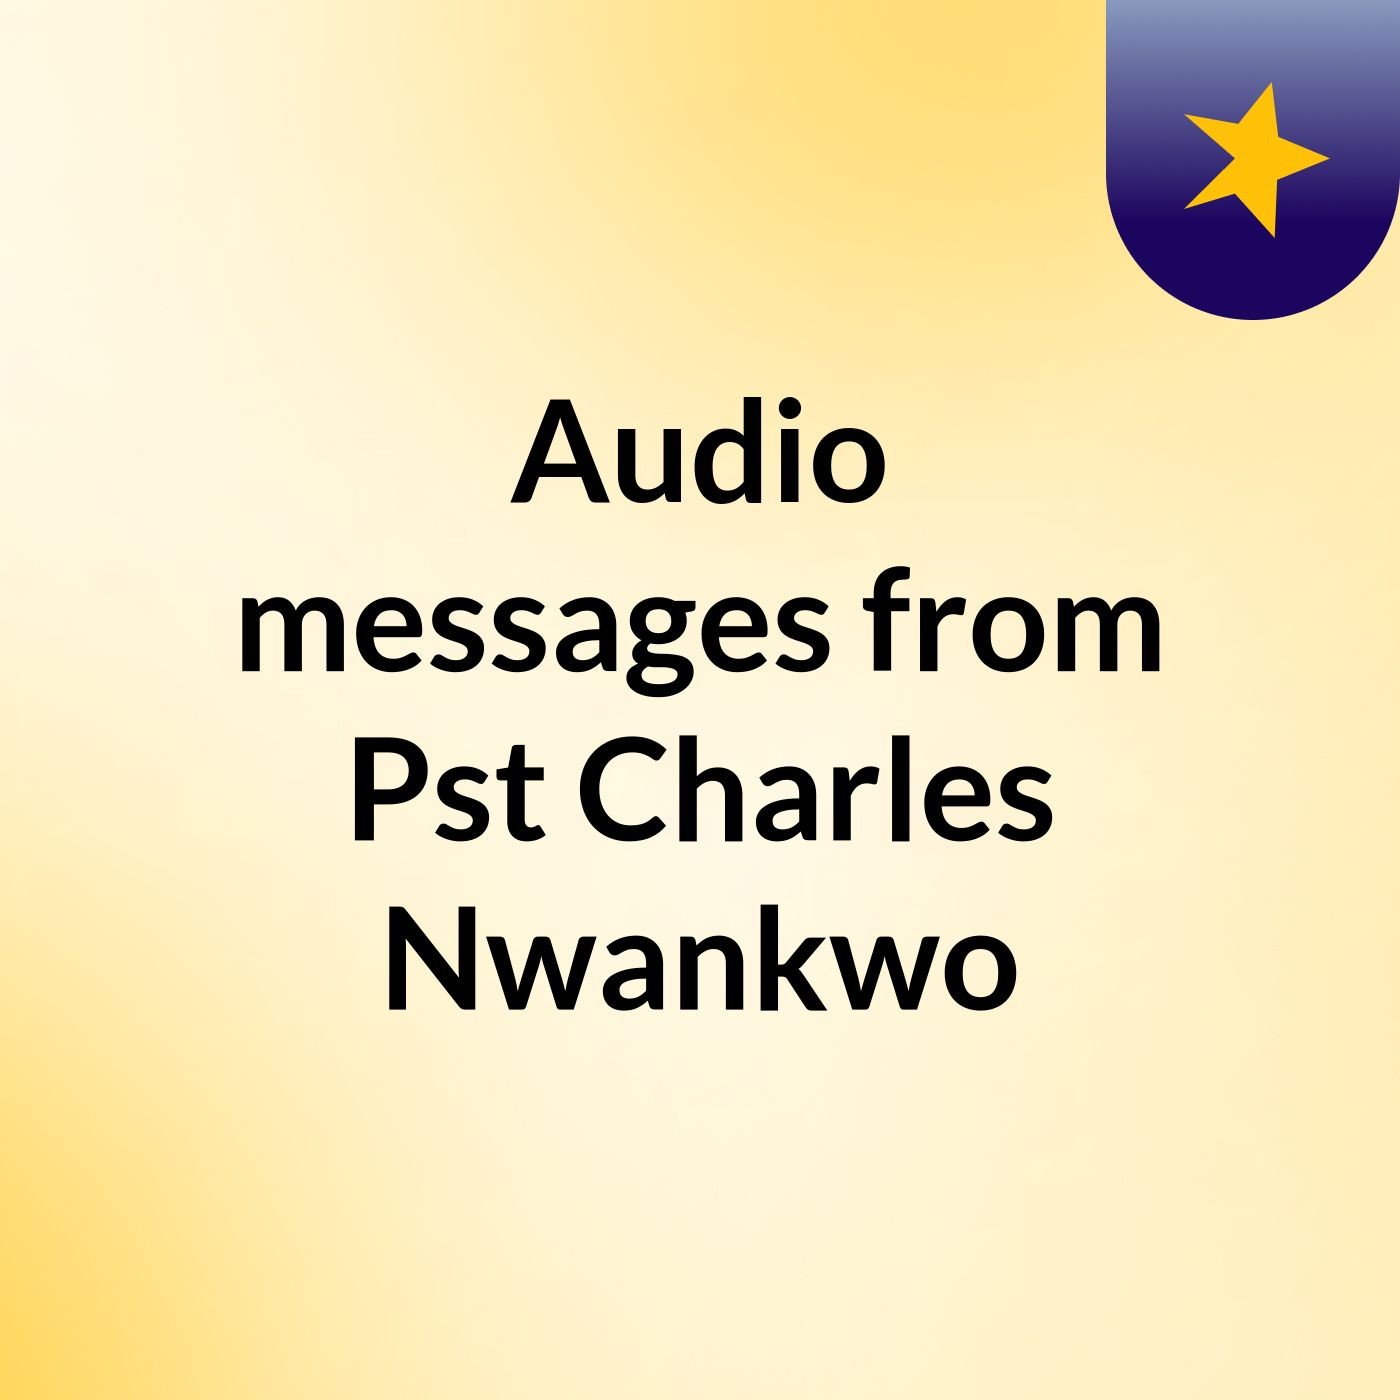 Audio messages from Pst Charles Nwankwo